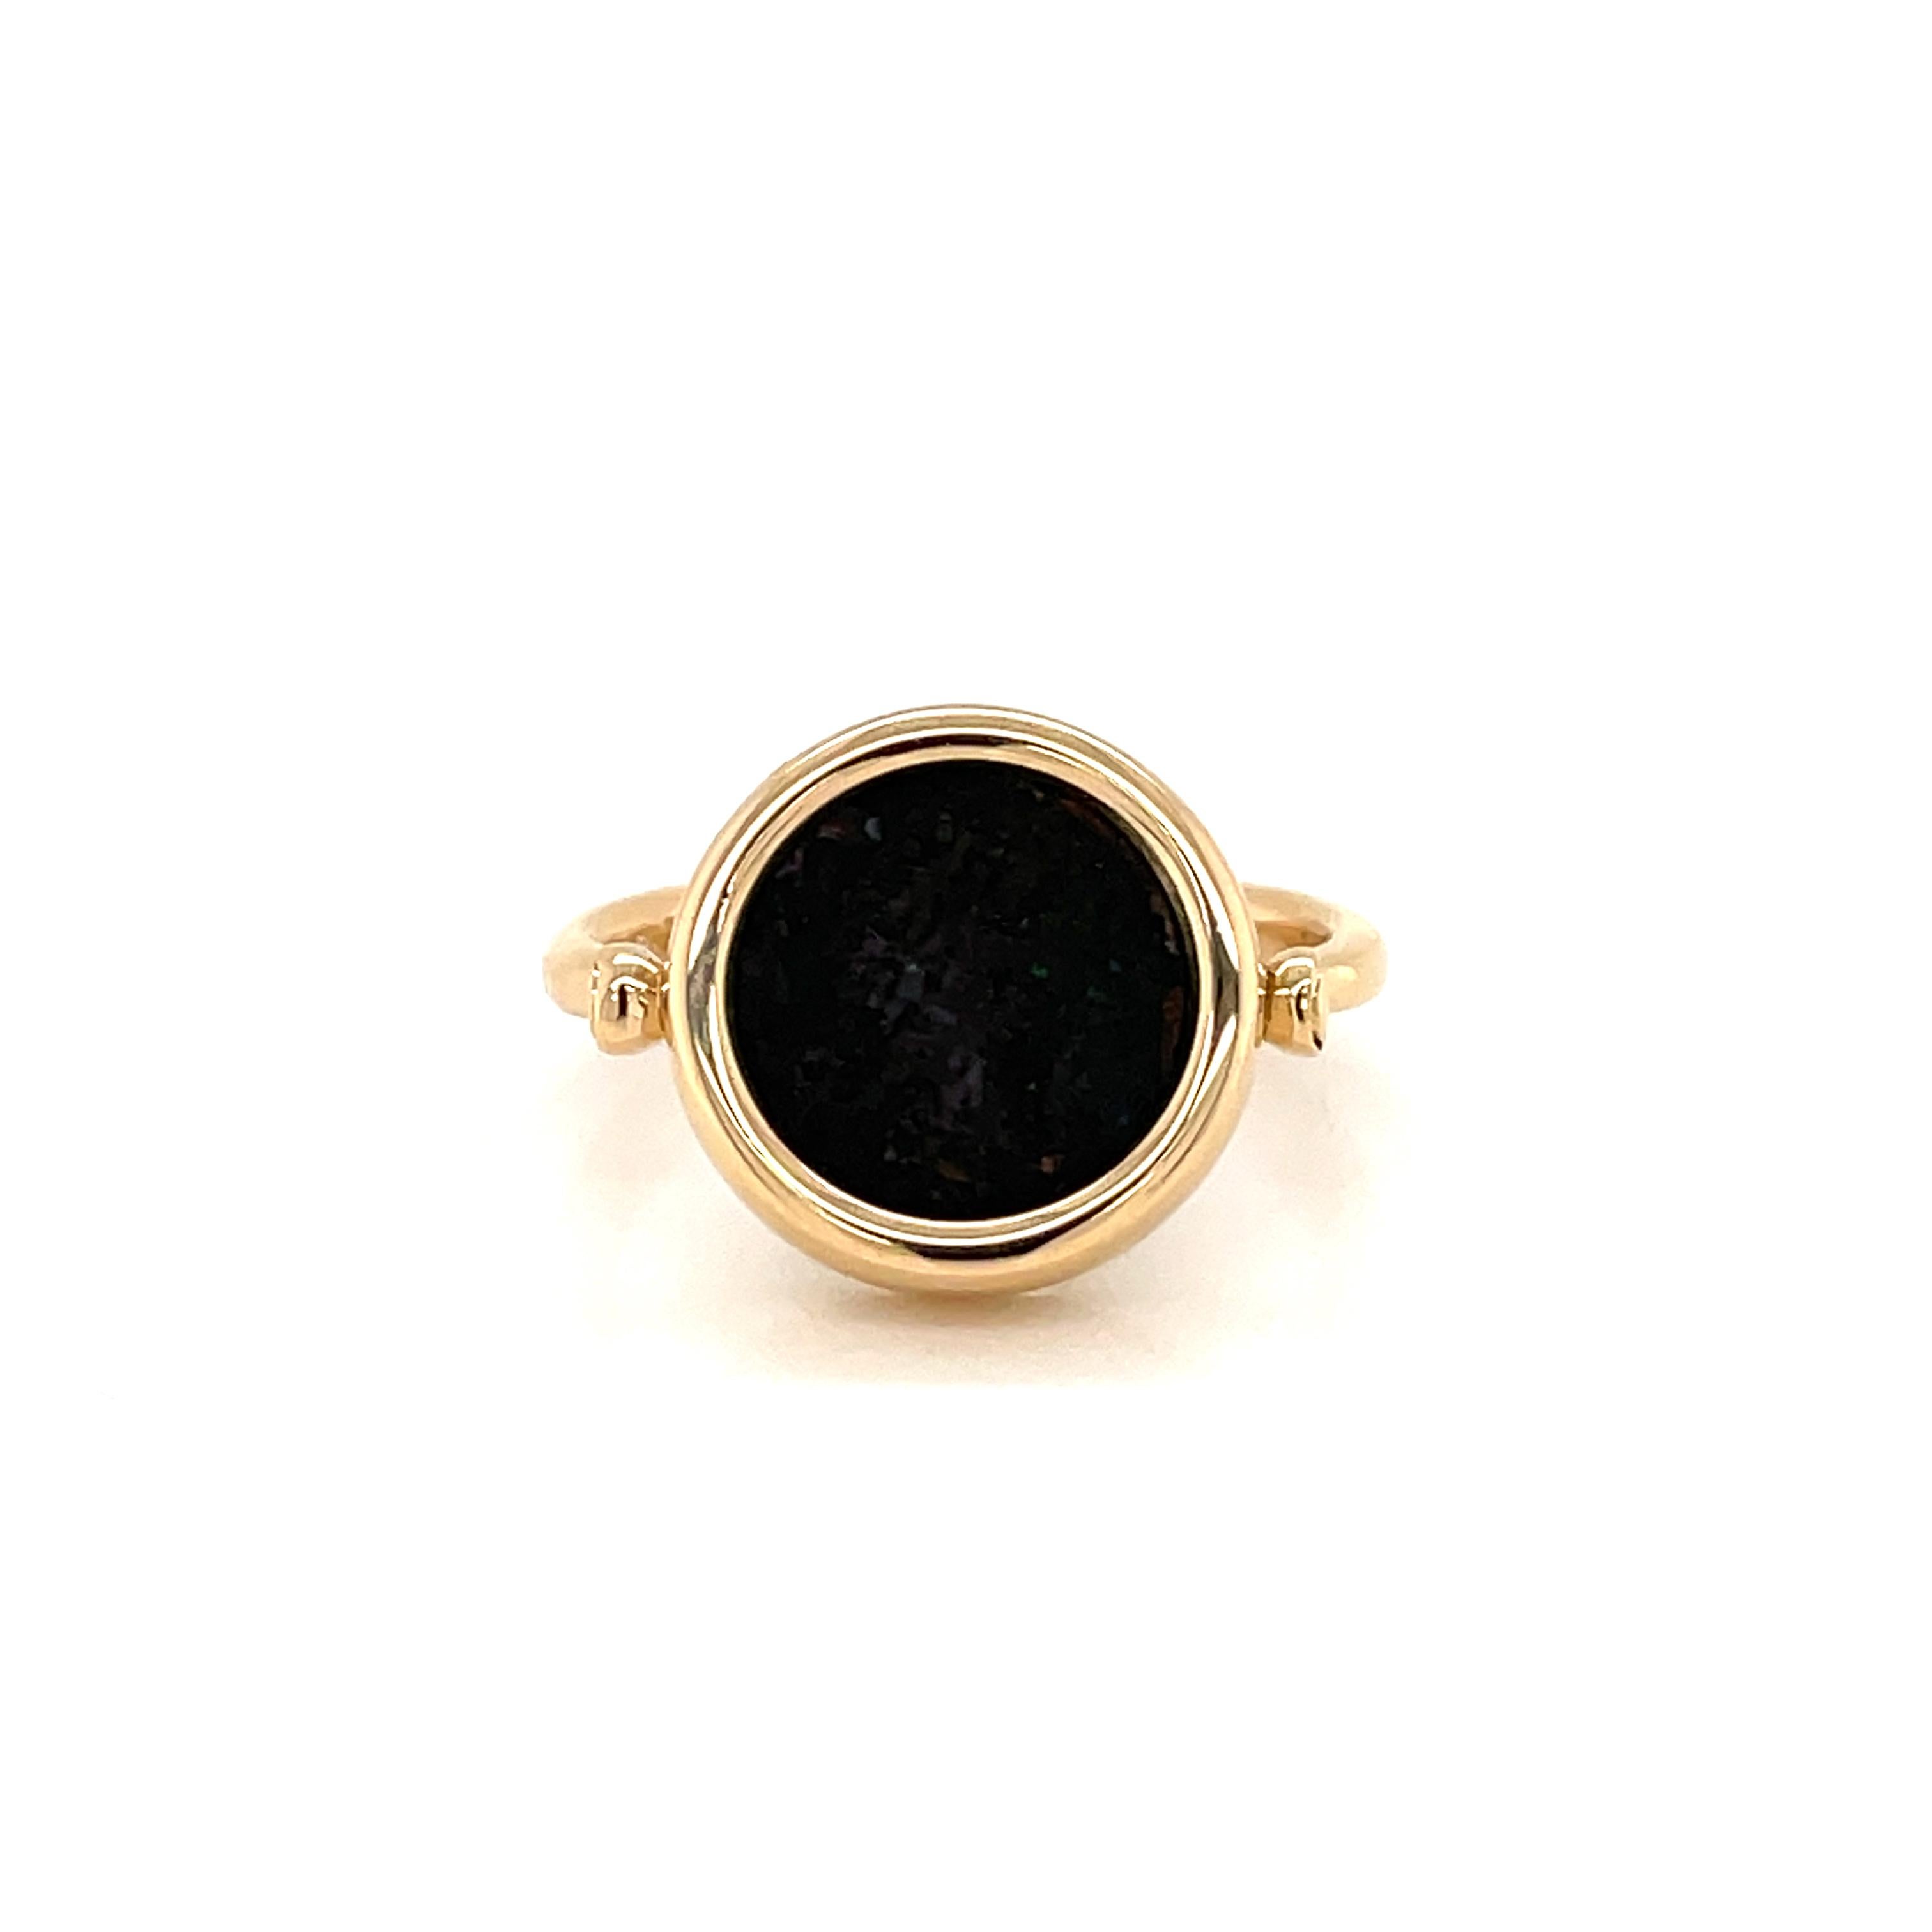 Bulgari 18k gold ring from Monete collection, featuring ancient 